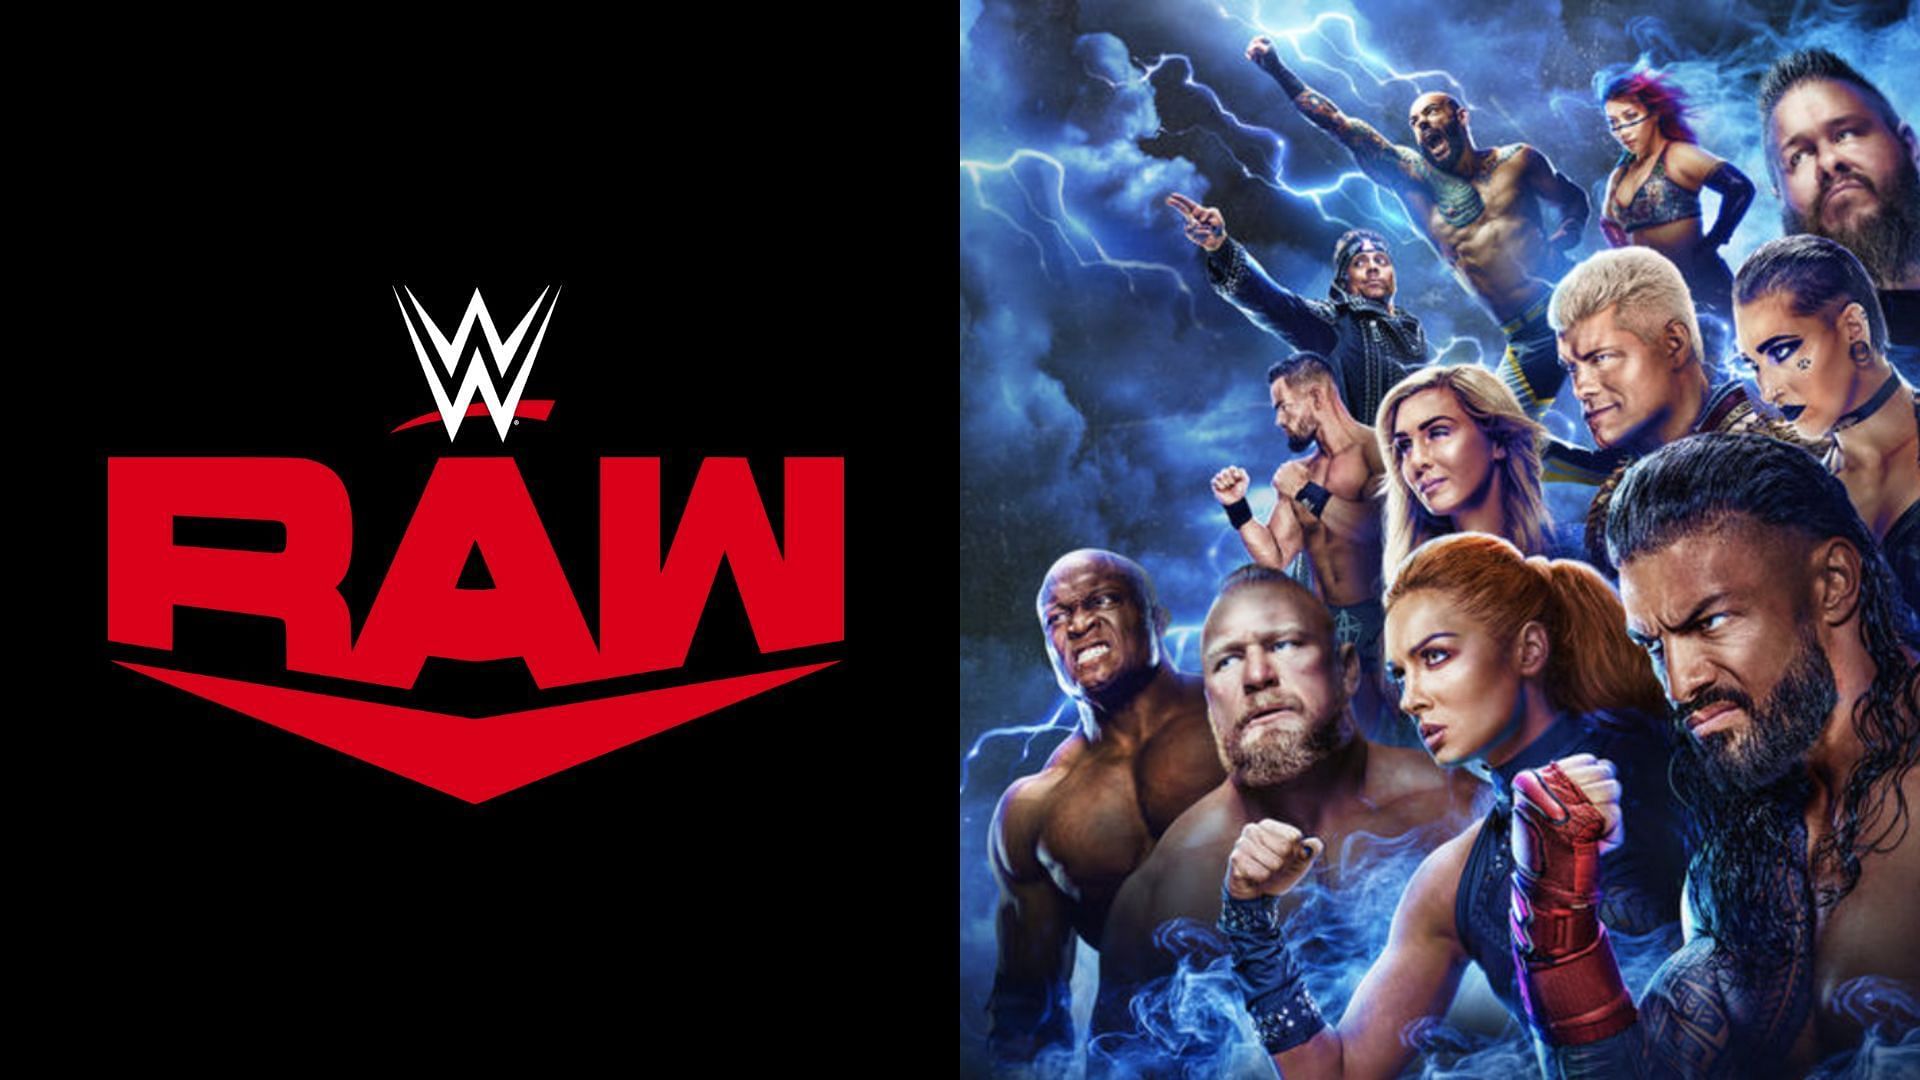 WWE RAW tonight will be the fallout of an eventful Royal Rumble